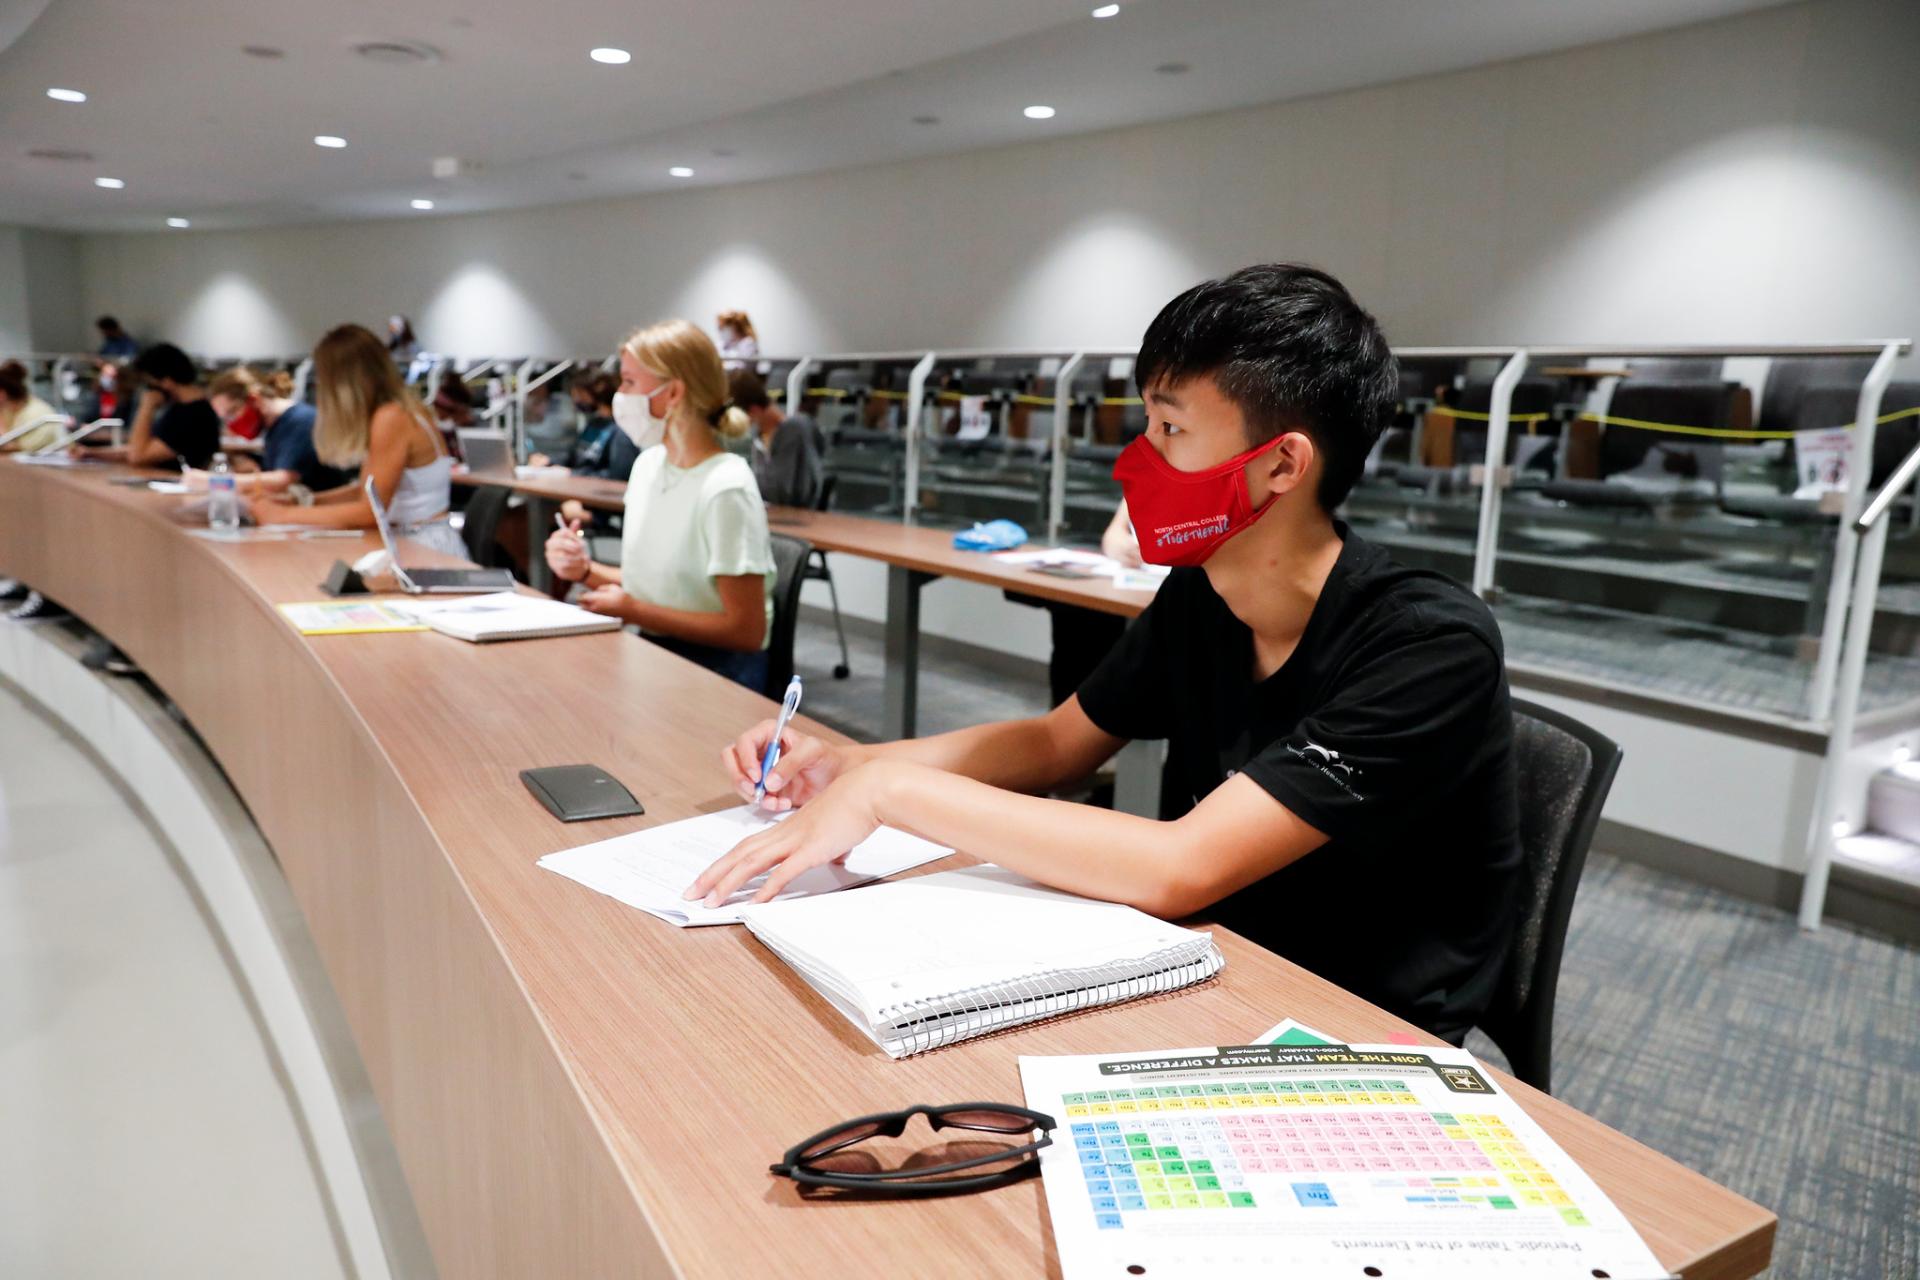 Lecture hall of North Central College students wearing facial masks due to COVID-19